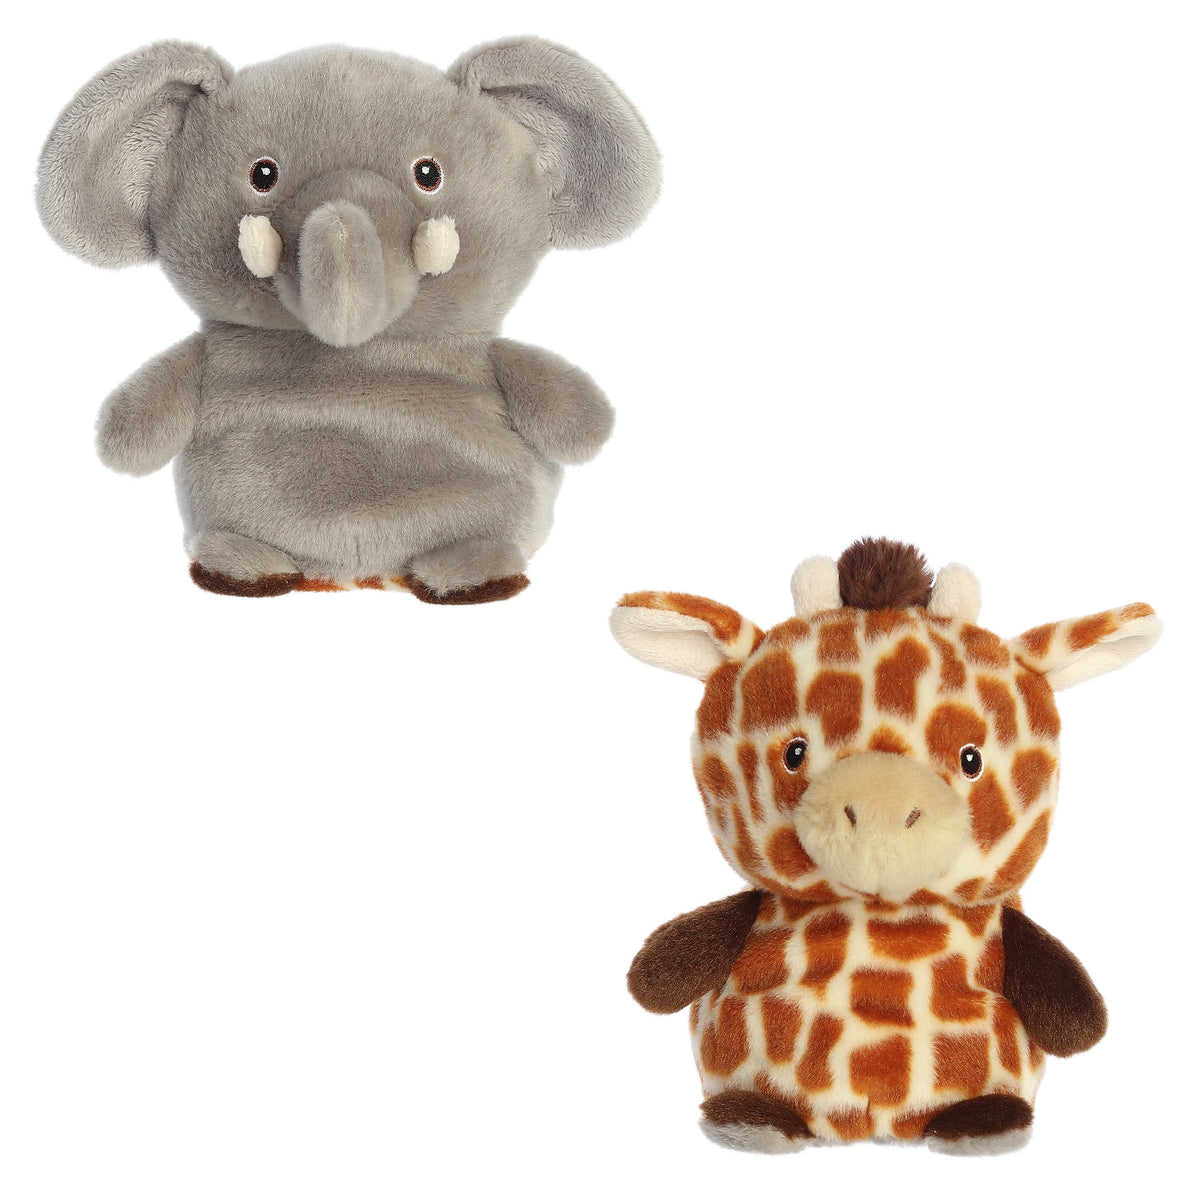 Reversible Eco Elephant plush/Giraffe plush, a transforming toy made from recycled materials for imaginative play.